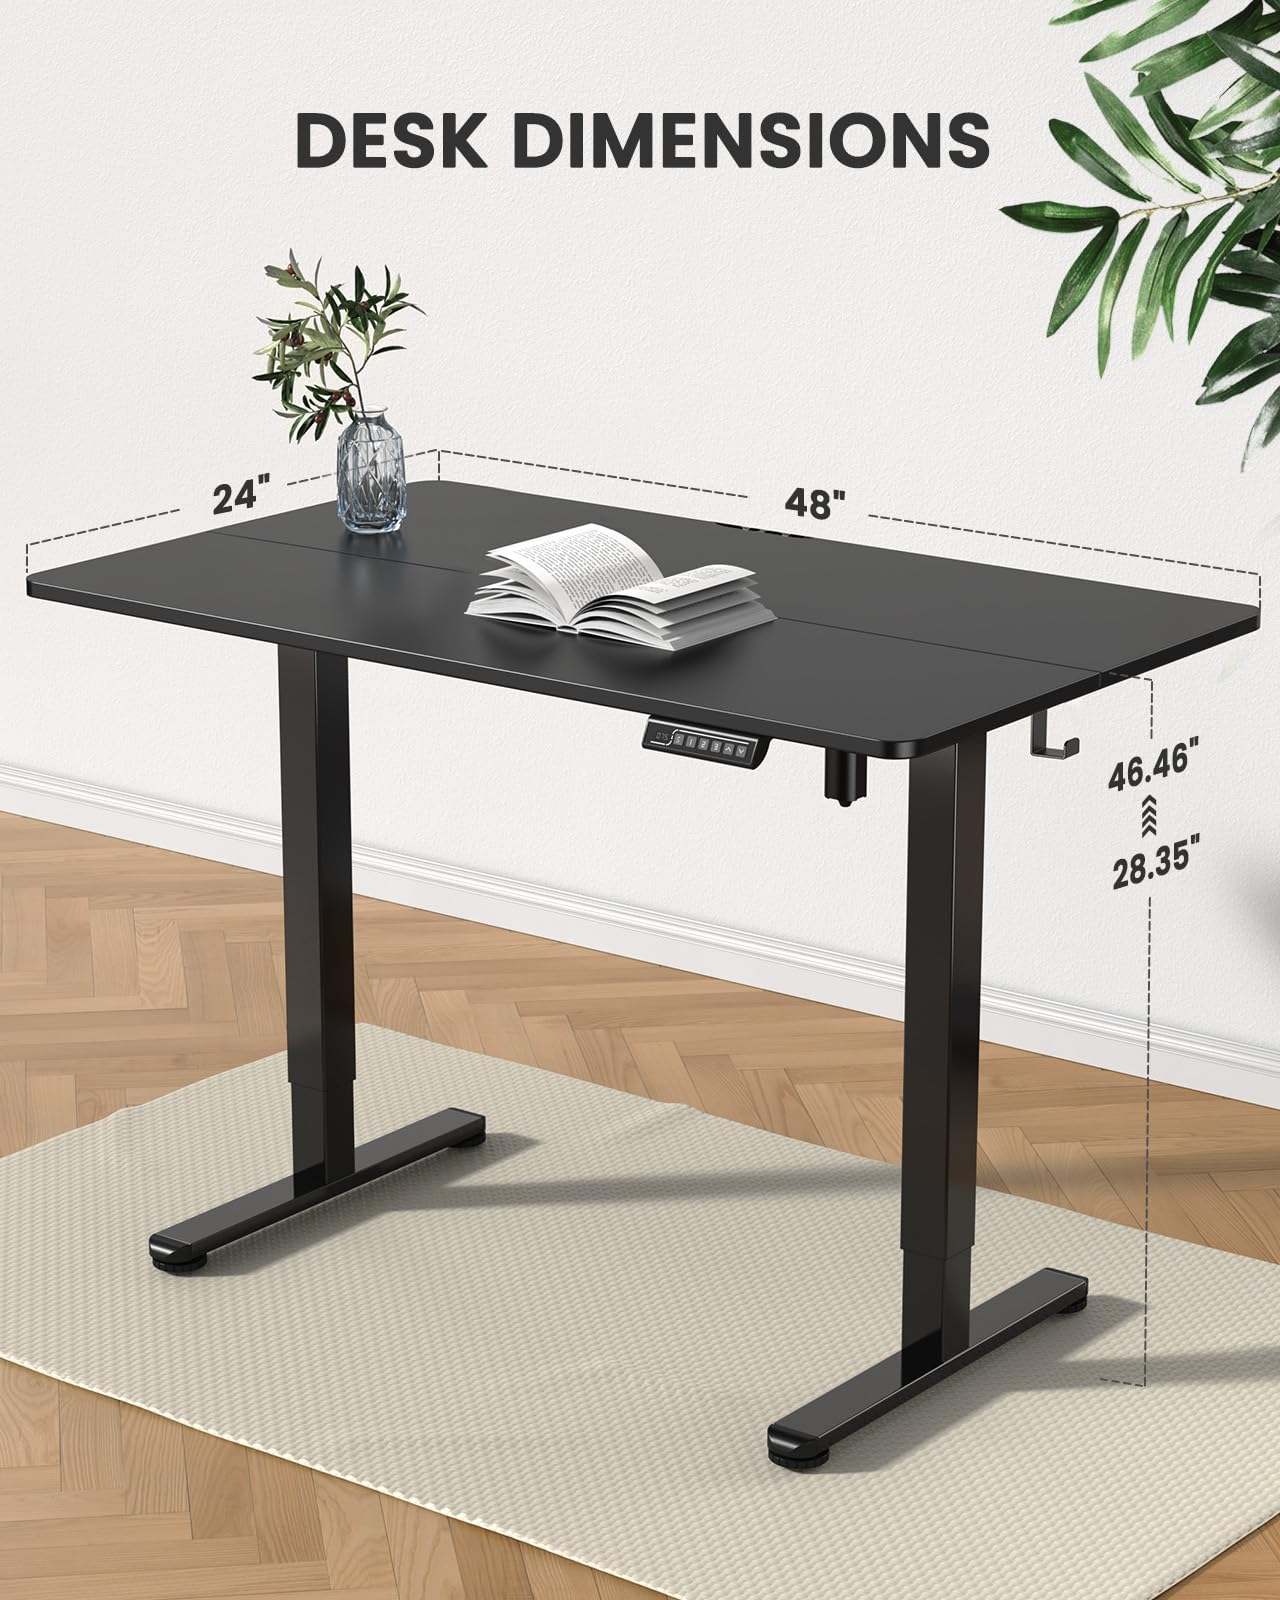 ErGear Height Adjustable Electric Standing Desk, 48 x 24 Inches Sit Stand up Desk, Memory Computer Home Office Desk (Black)